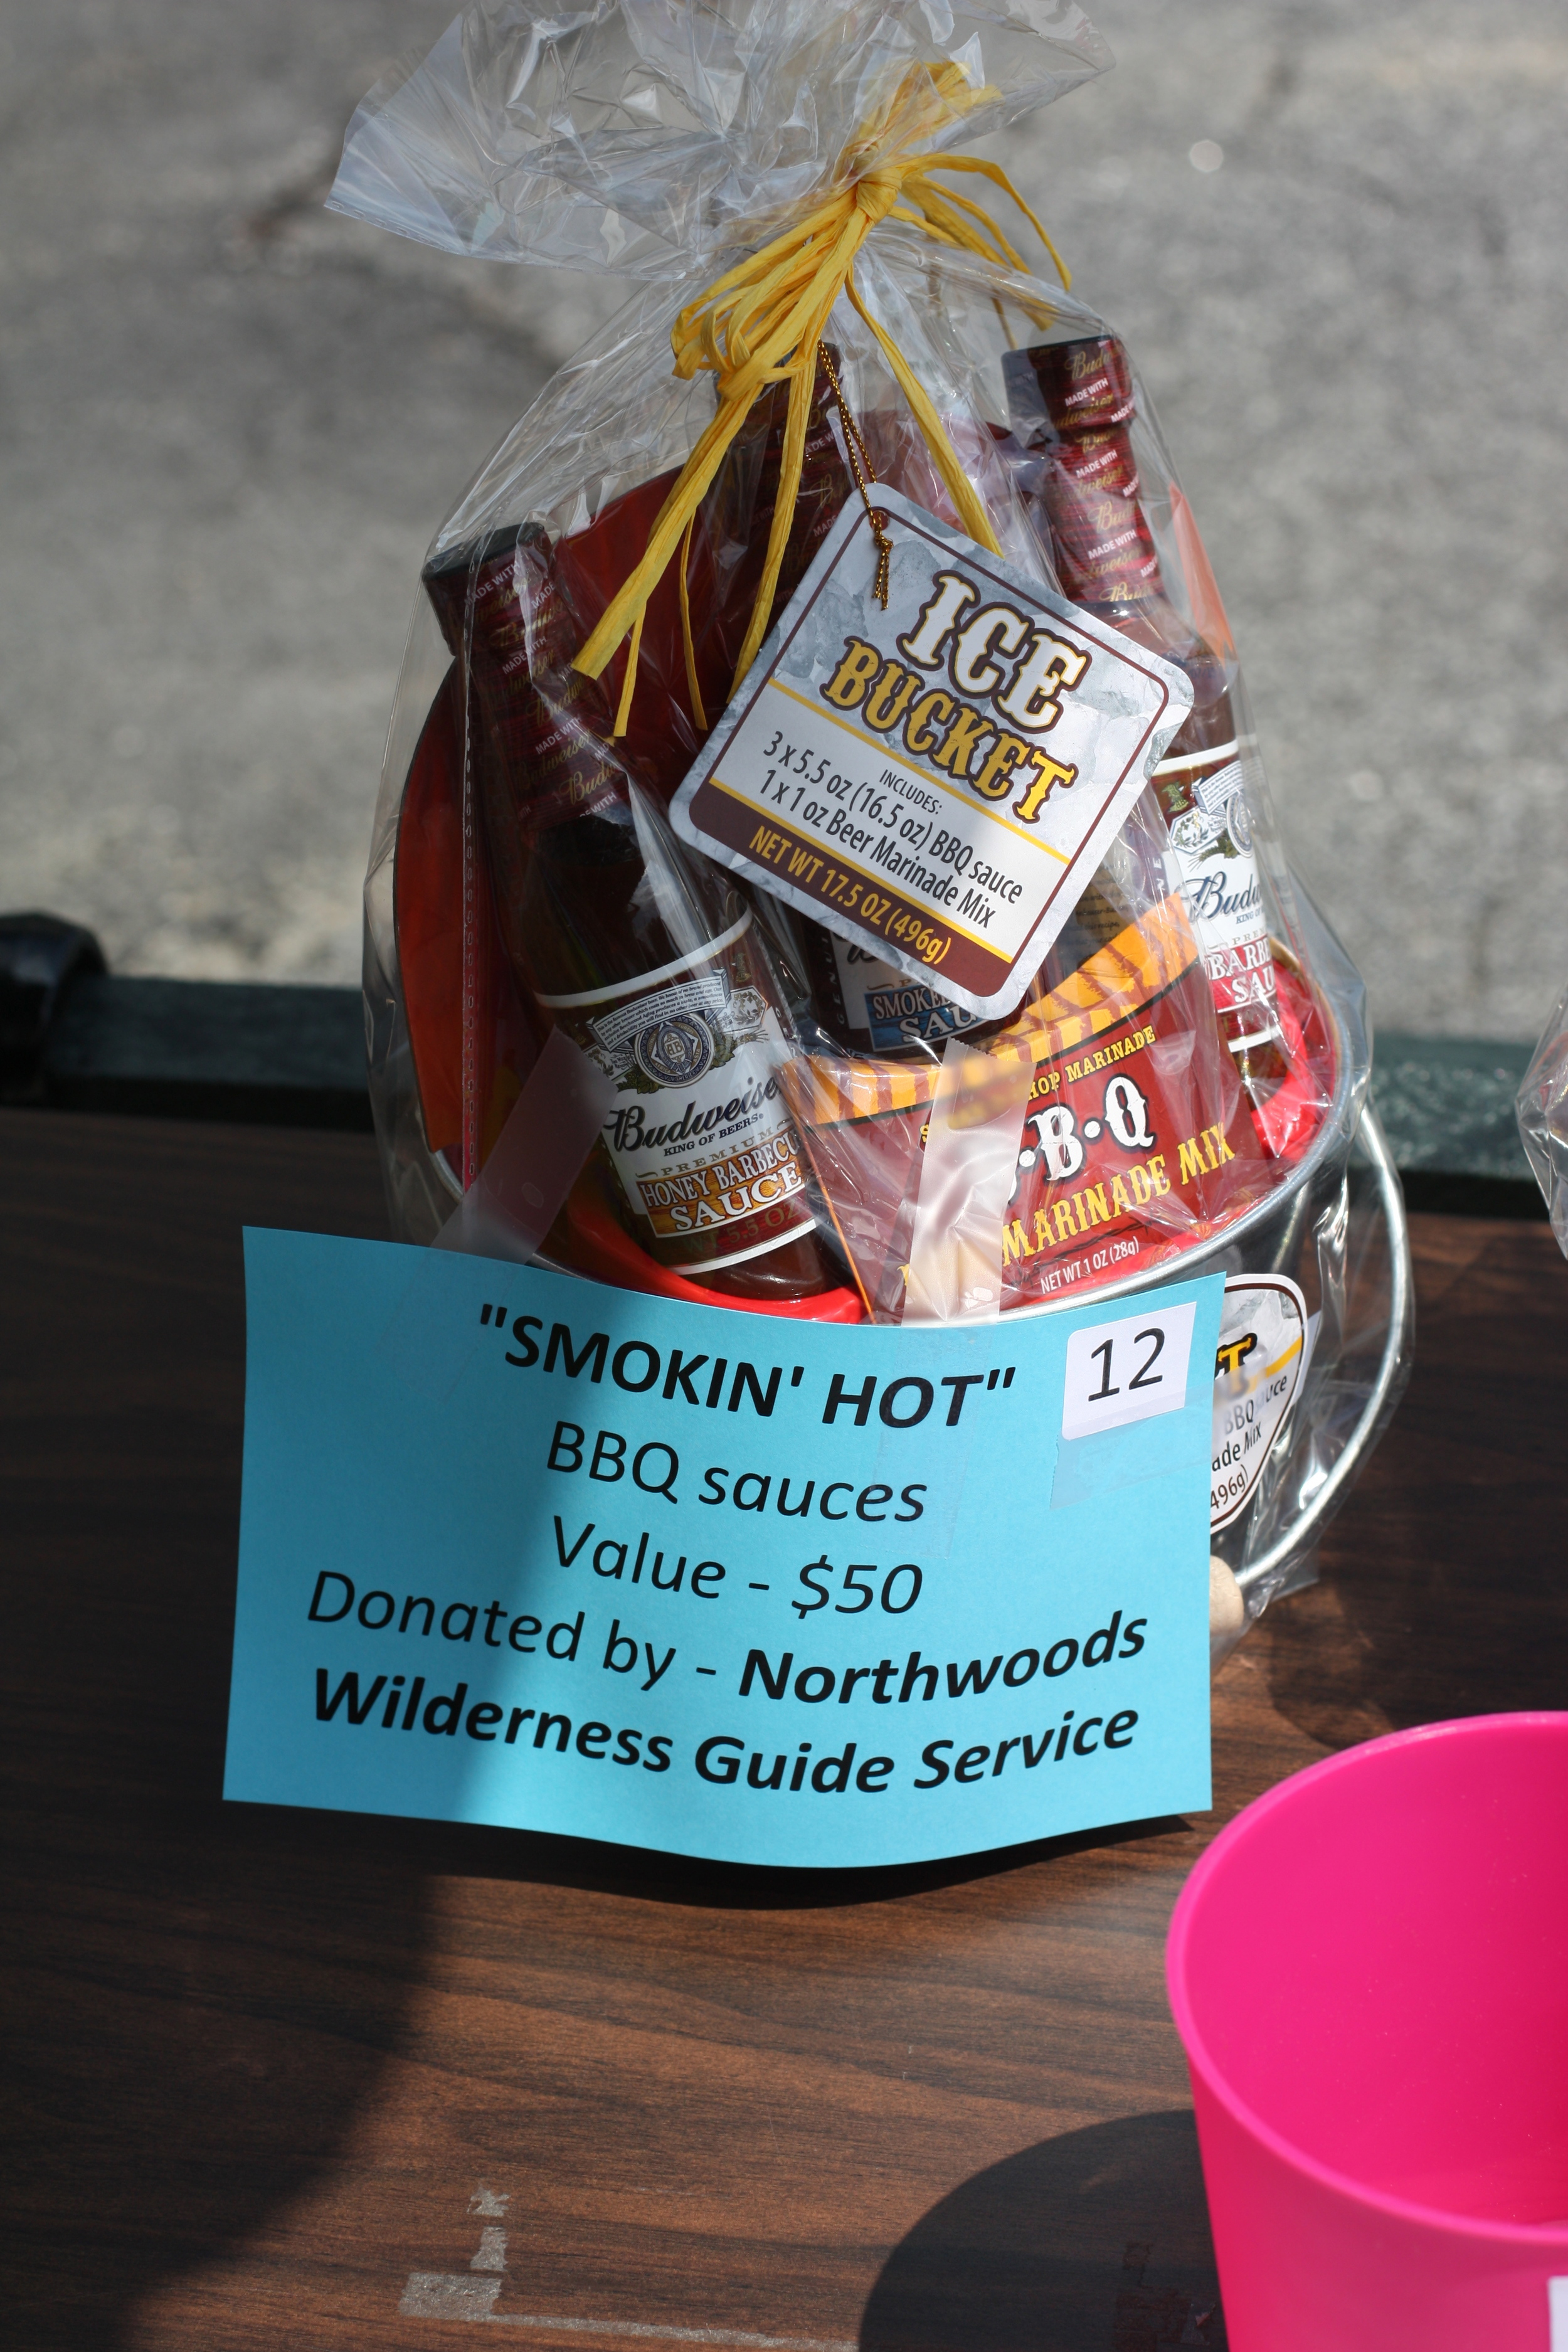 Prizes galore at the Annual Schroon Lake Chamber of Commerce Basket Raffle!